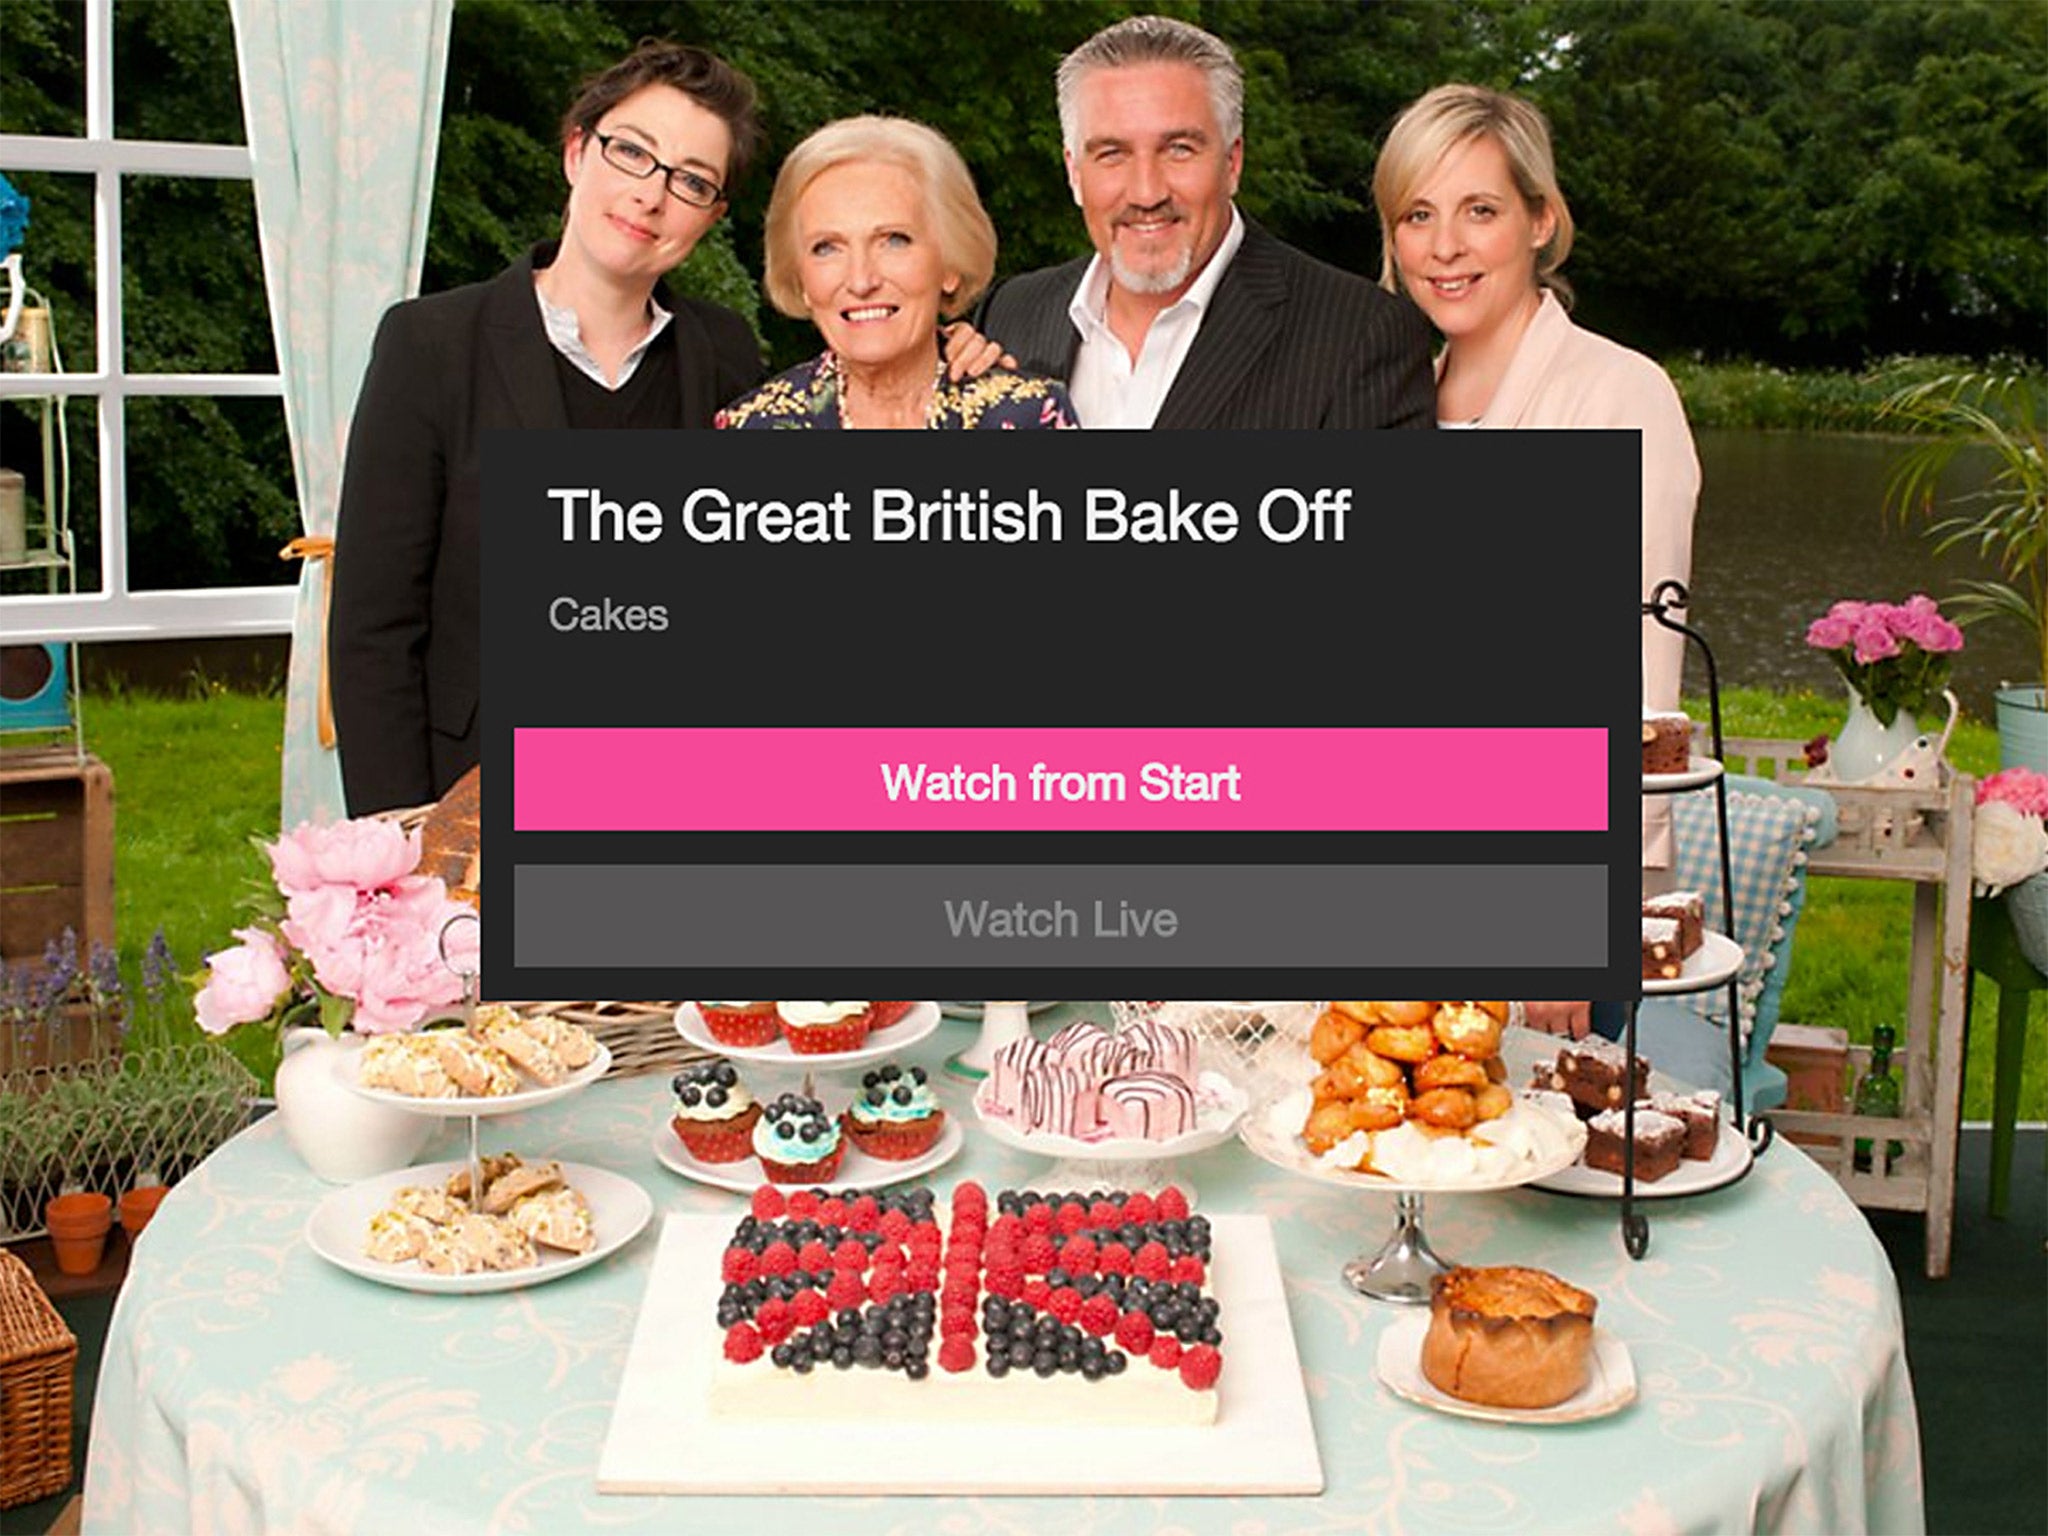 BBC iPlayer is introducing new catch-up features